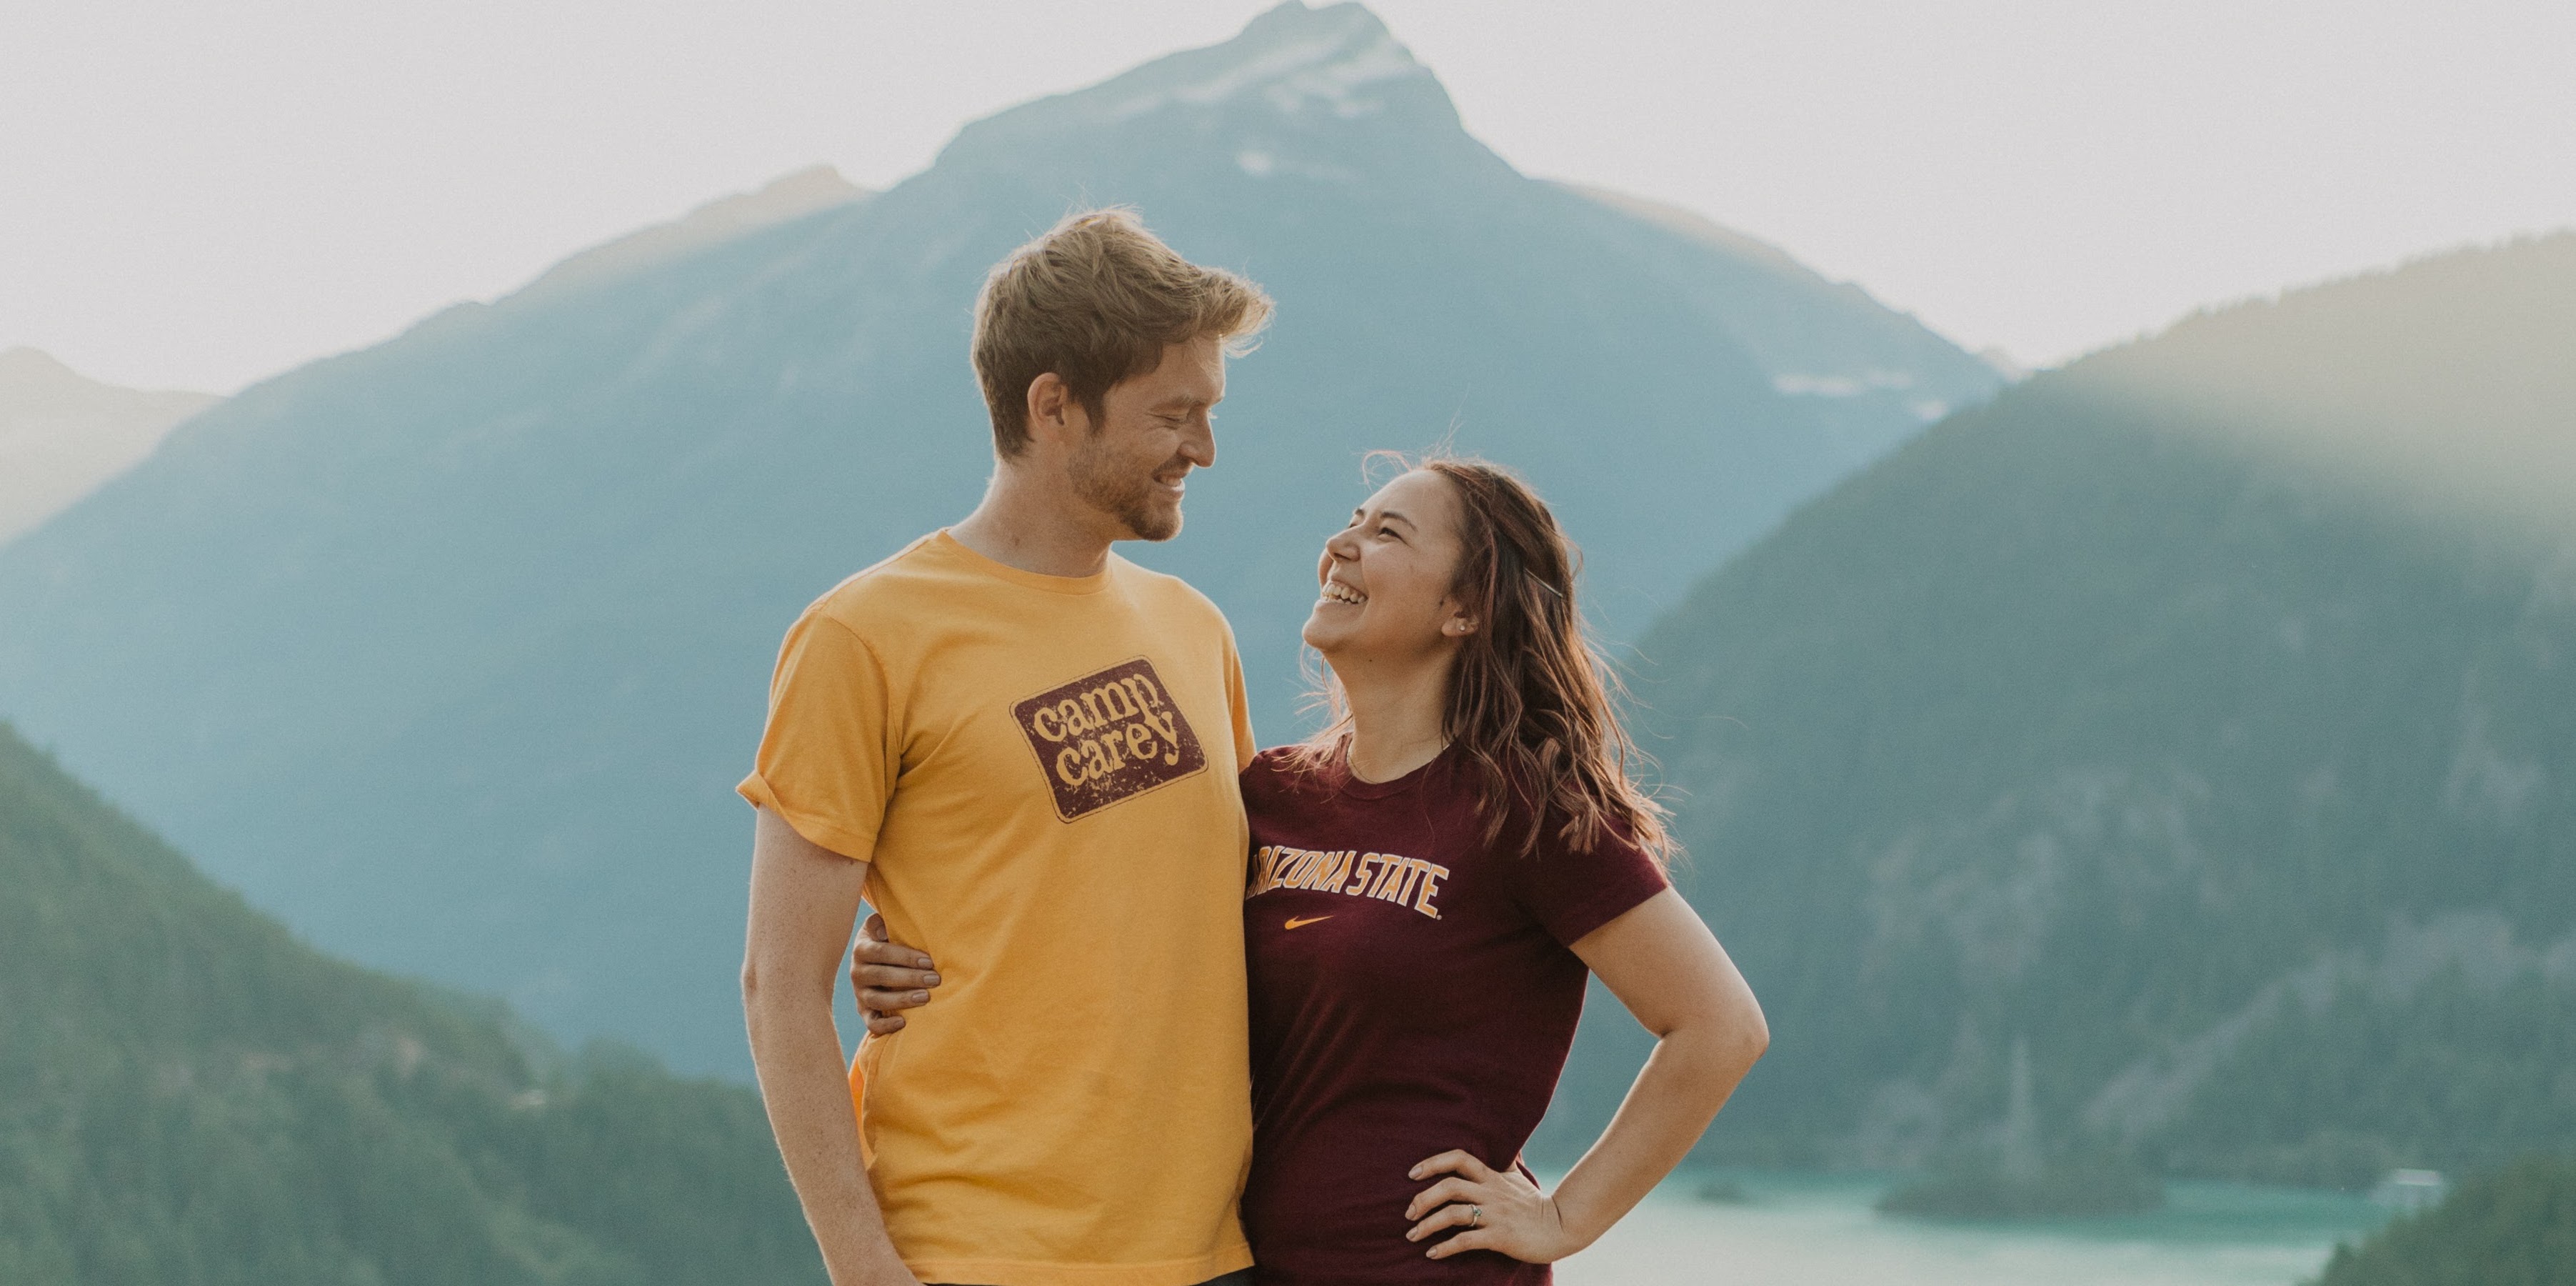 Man and woman smiling with mountain and lake in background.